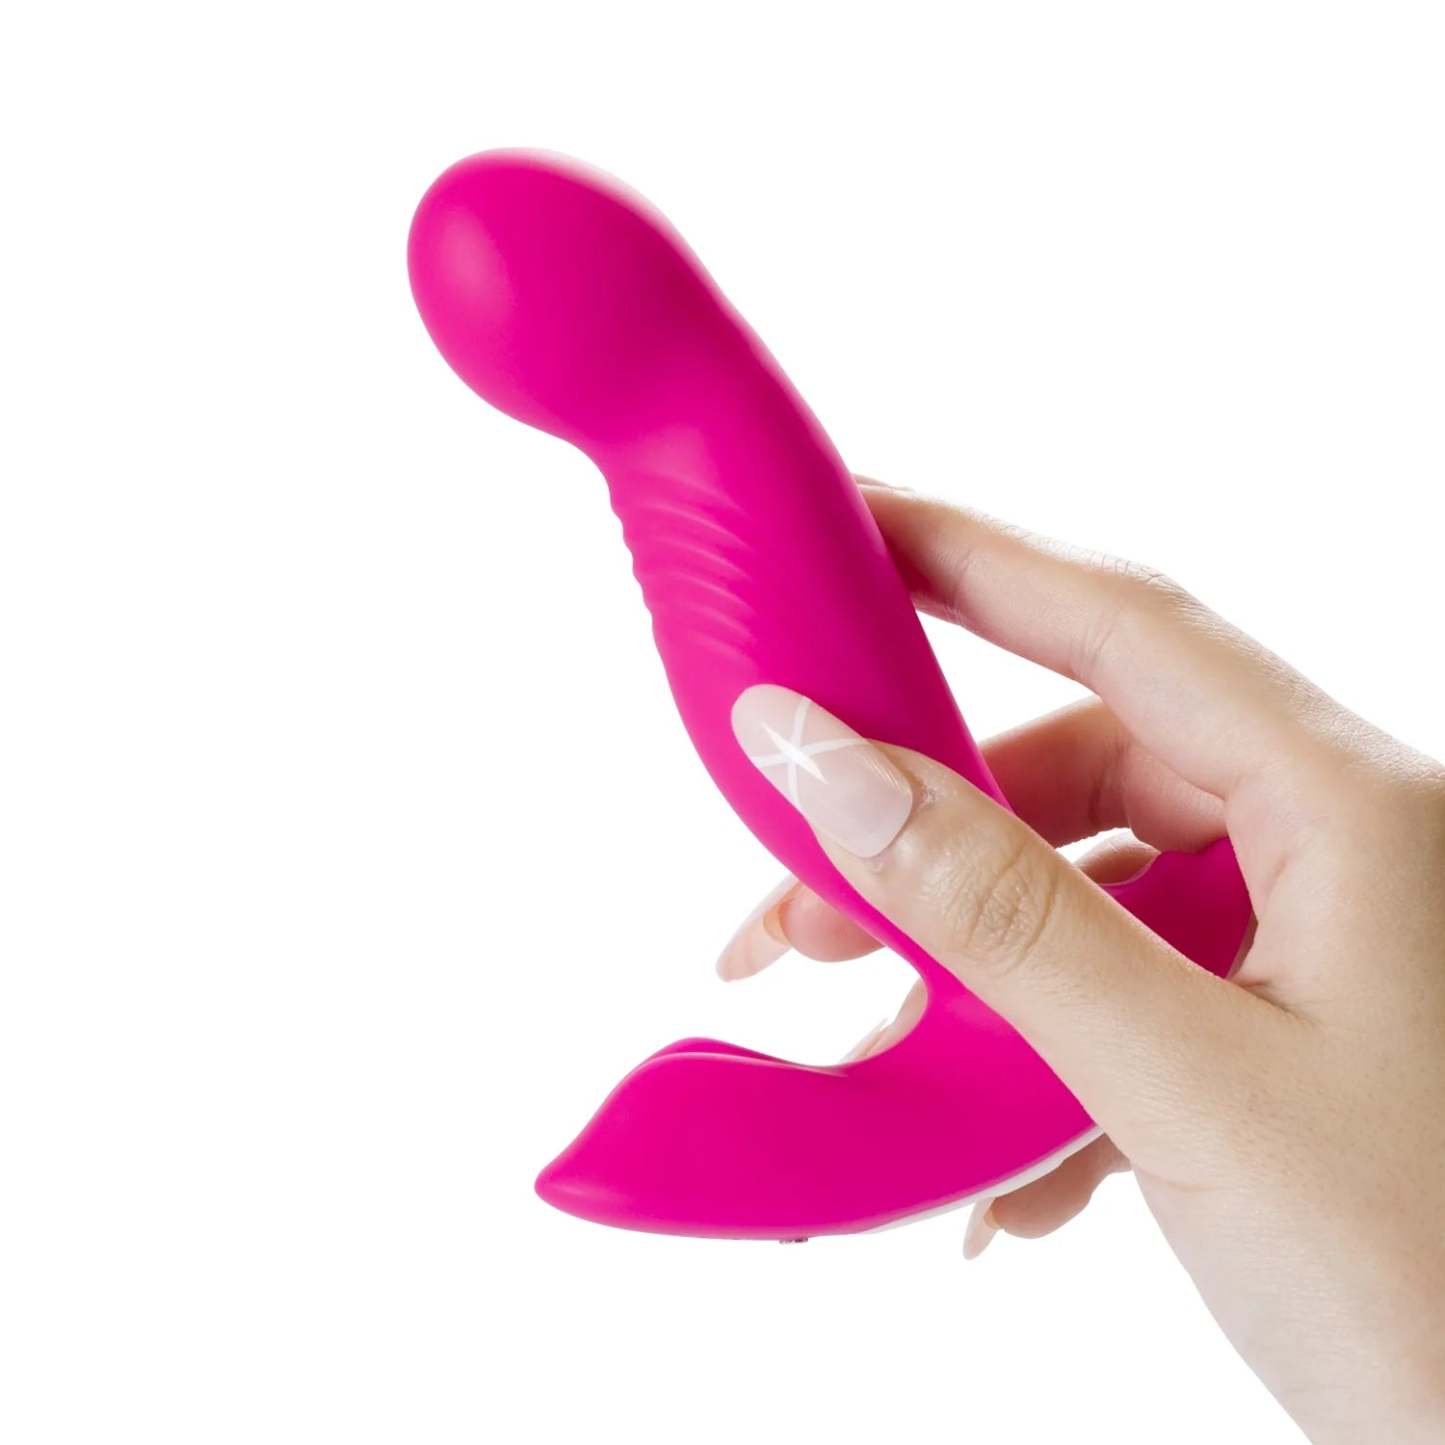 Crave 2 - Clit Tickle G Spot Toy With Rotating Massage Head-BestGSpot